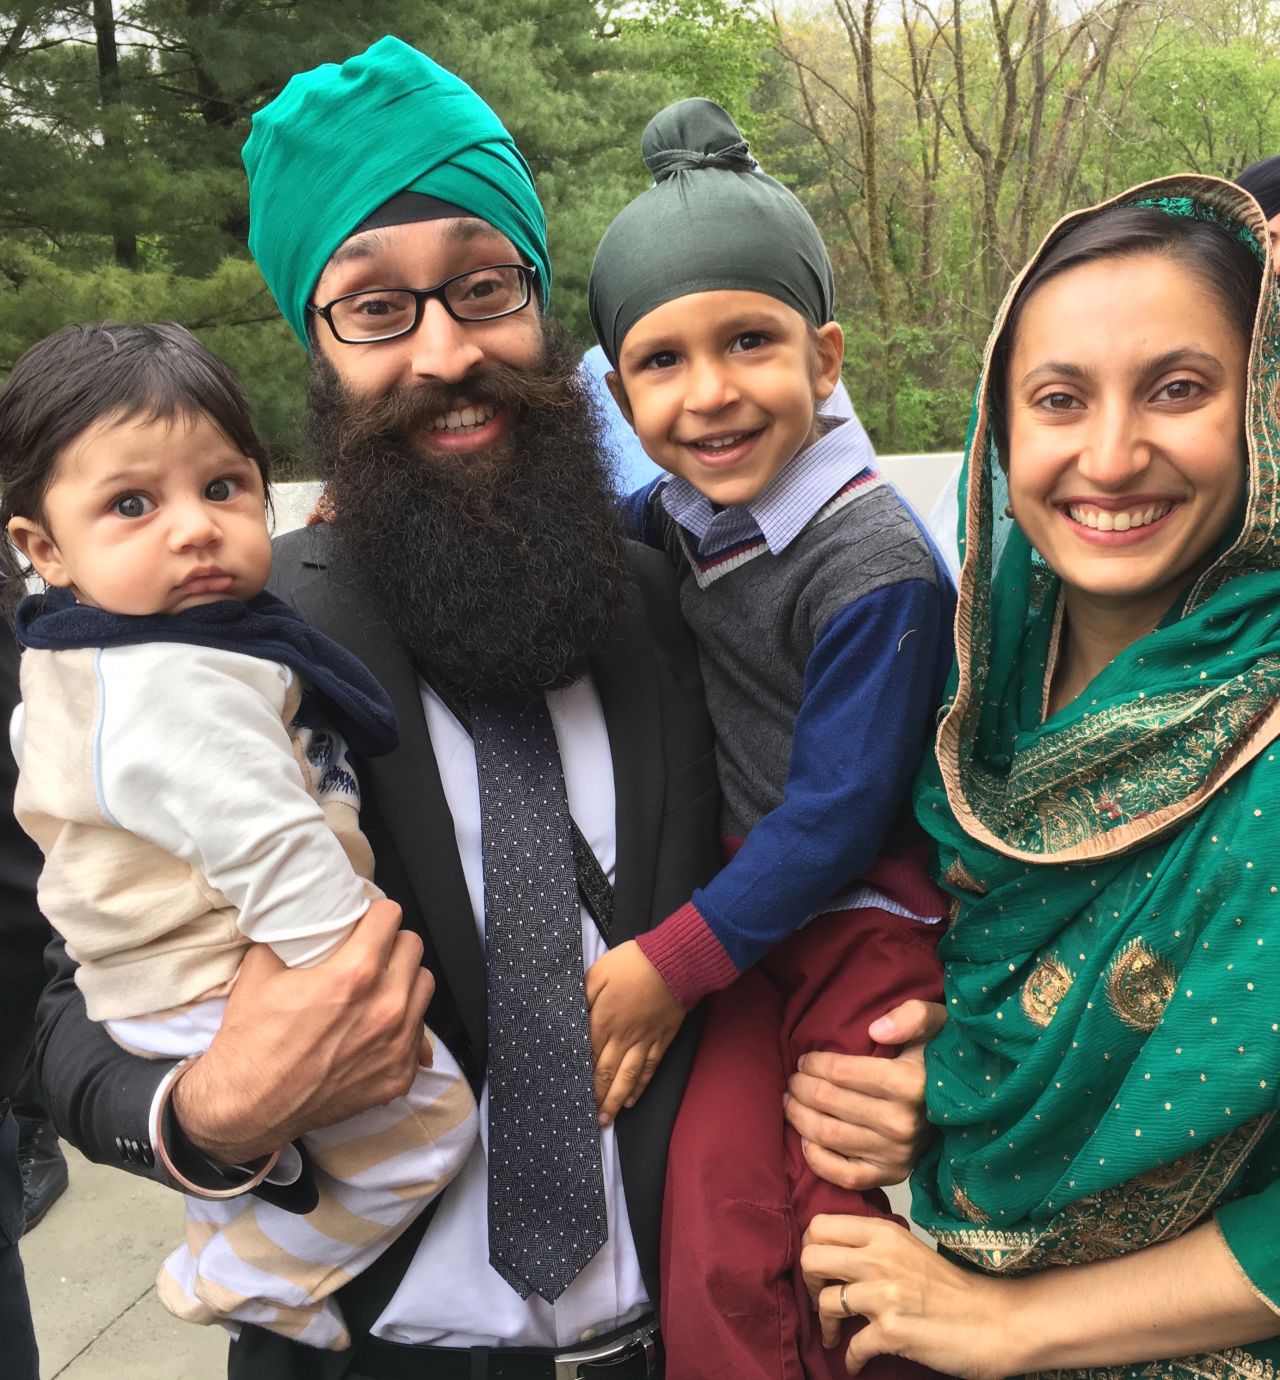 Dr. Prabhjot Singh was beaten in 2013 by a group of young men and boys who accosted him near Central Park in New York and shouted racial slurs. He and his wife, Manmeet, wish to raise their sons in an America without hate. 